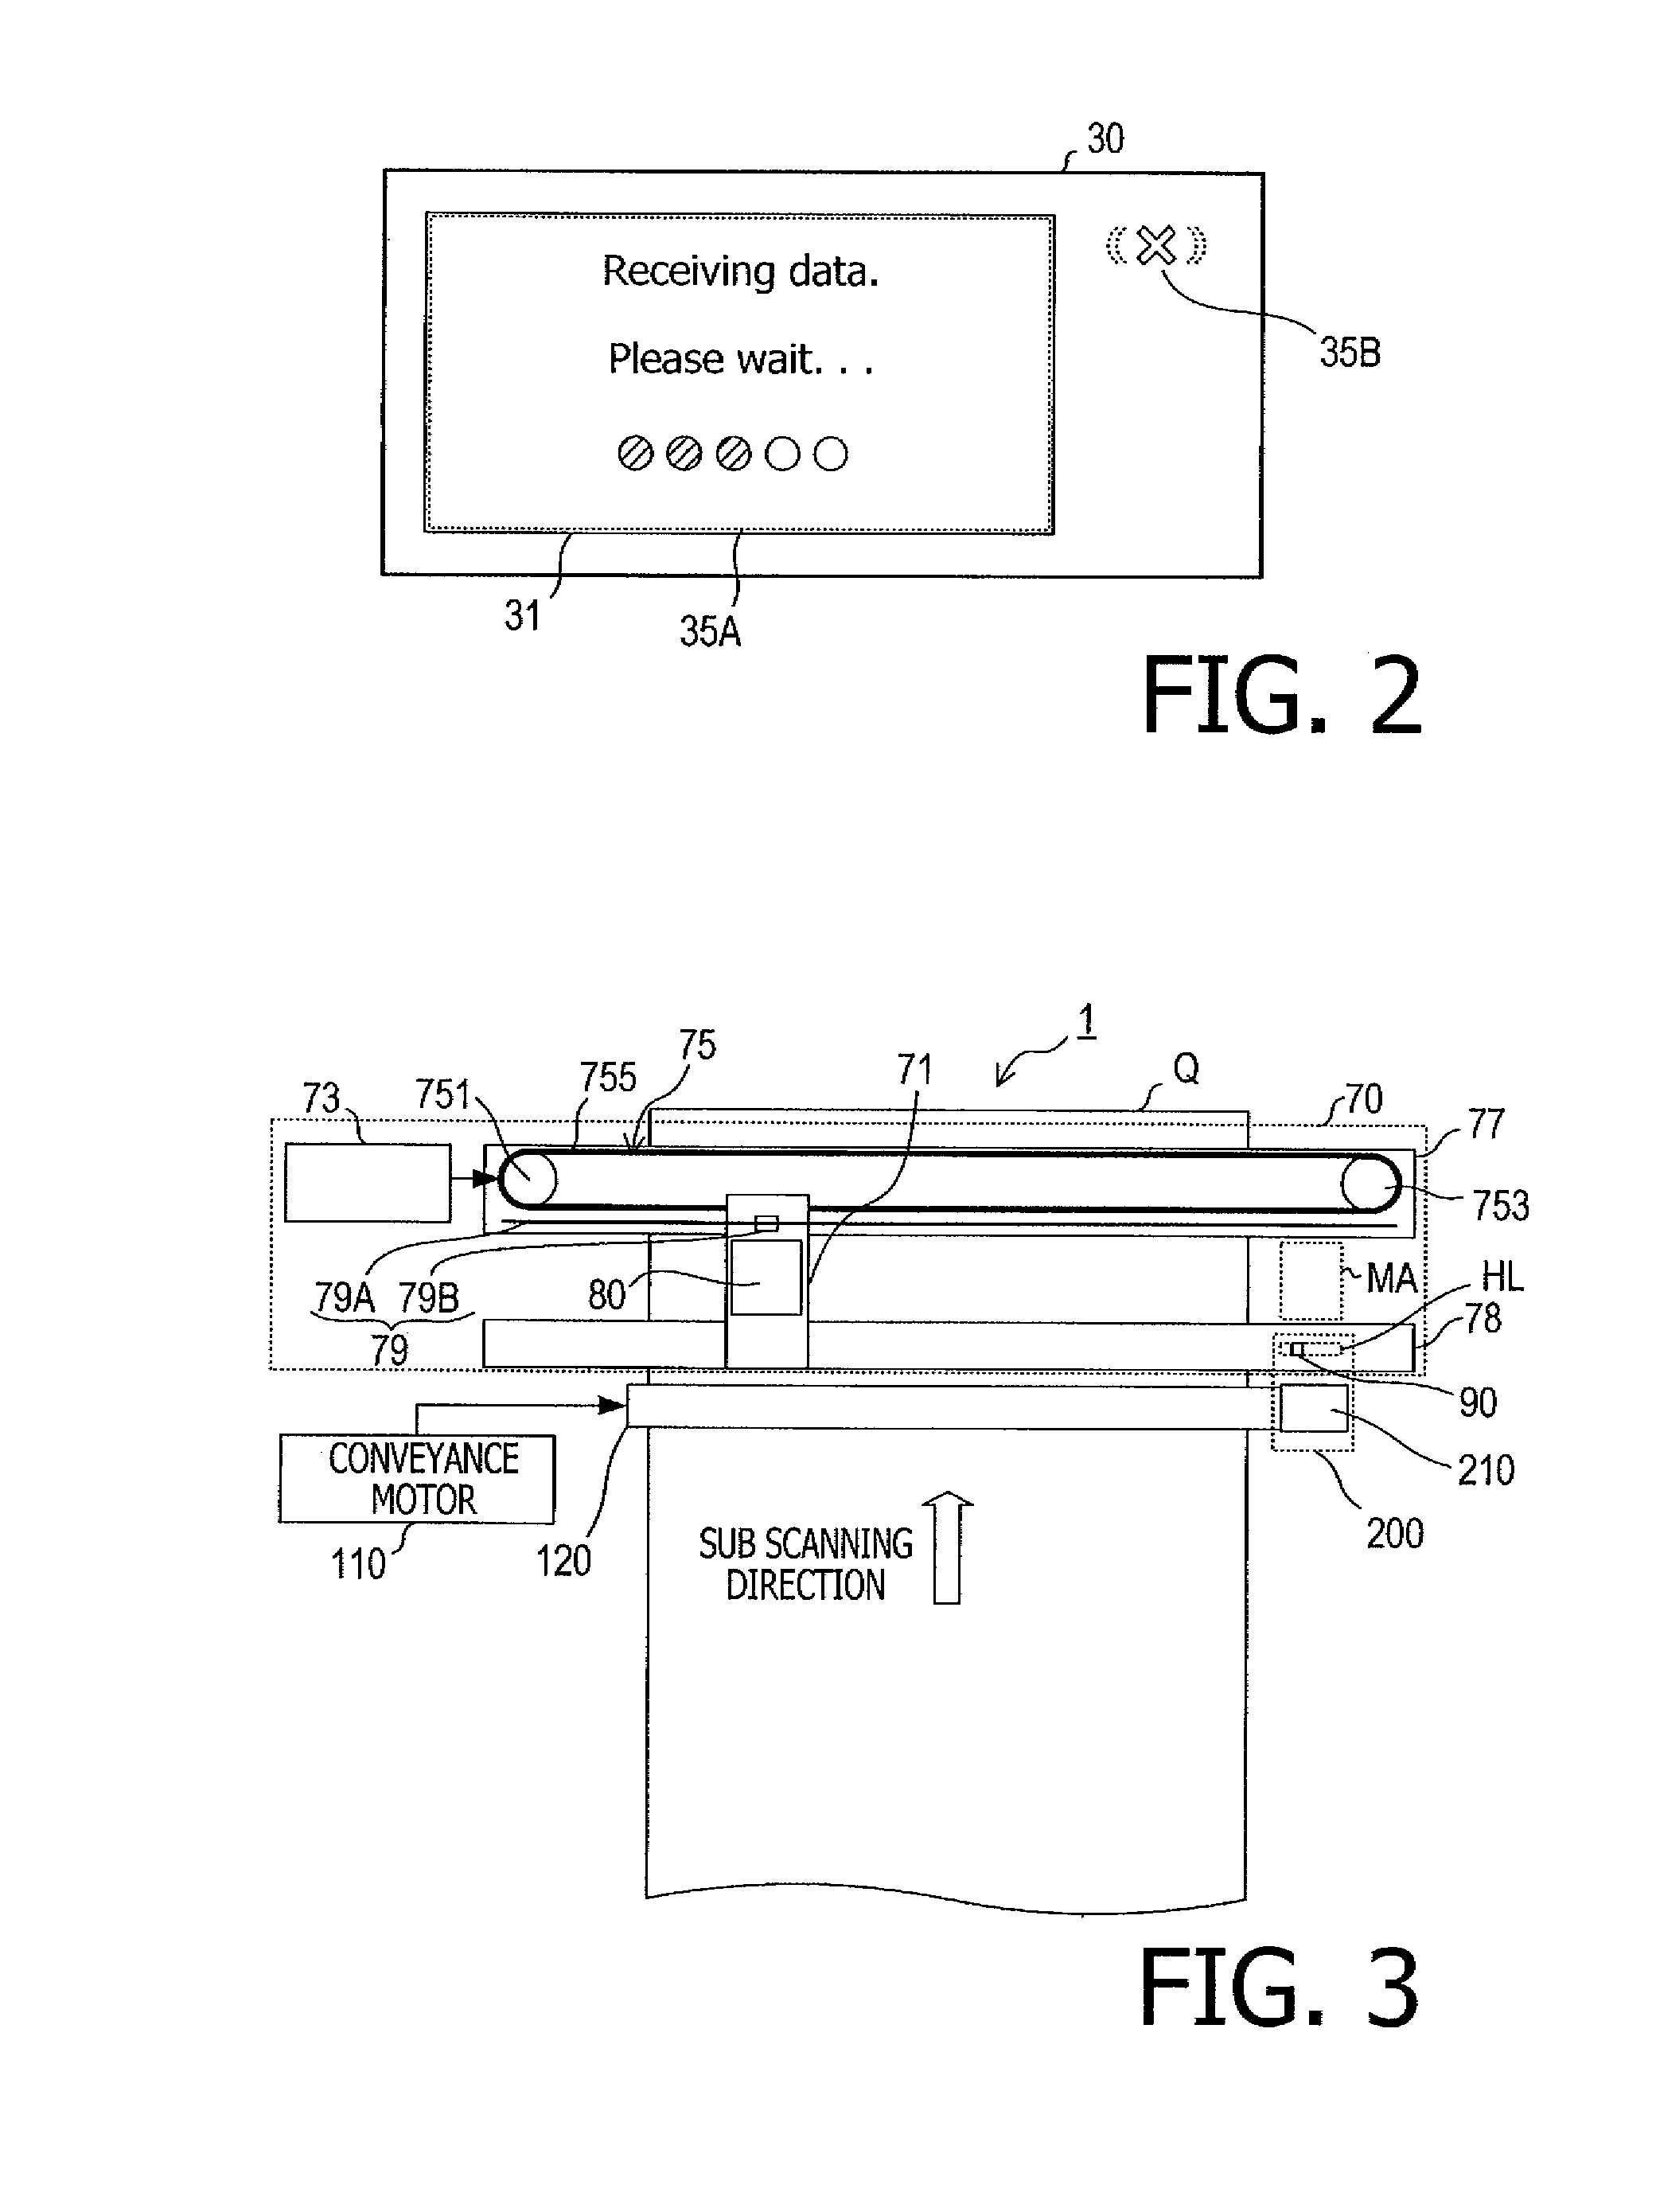 Image Printing Apparatus and Method for Controlling an Image Printing Apparatus